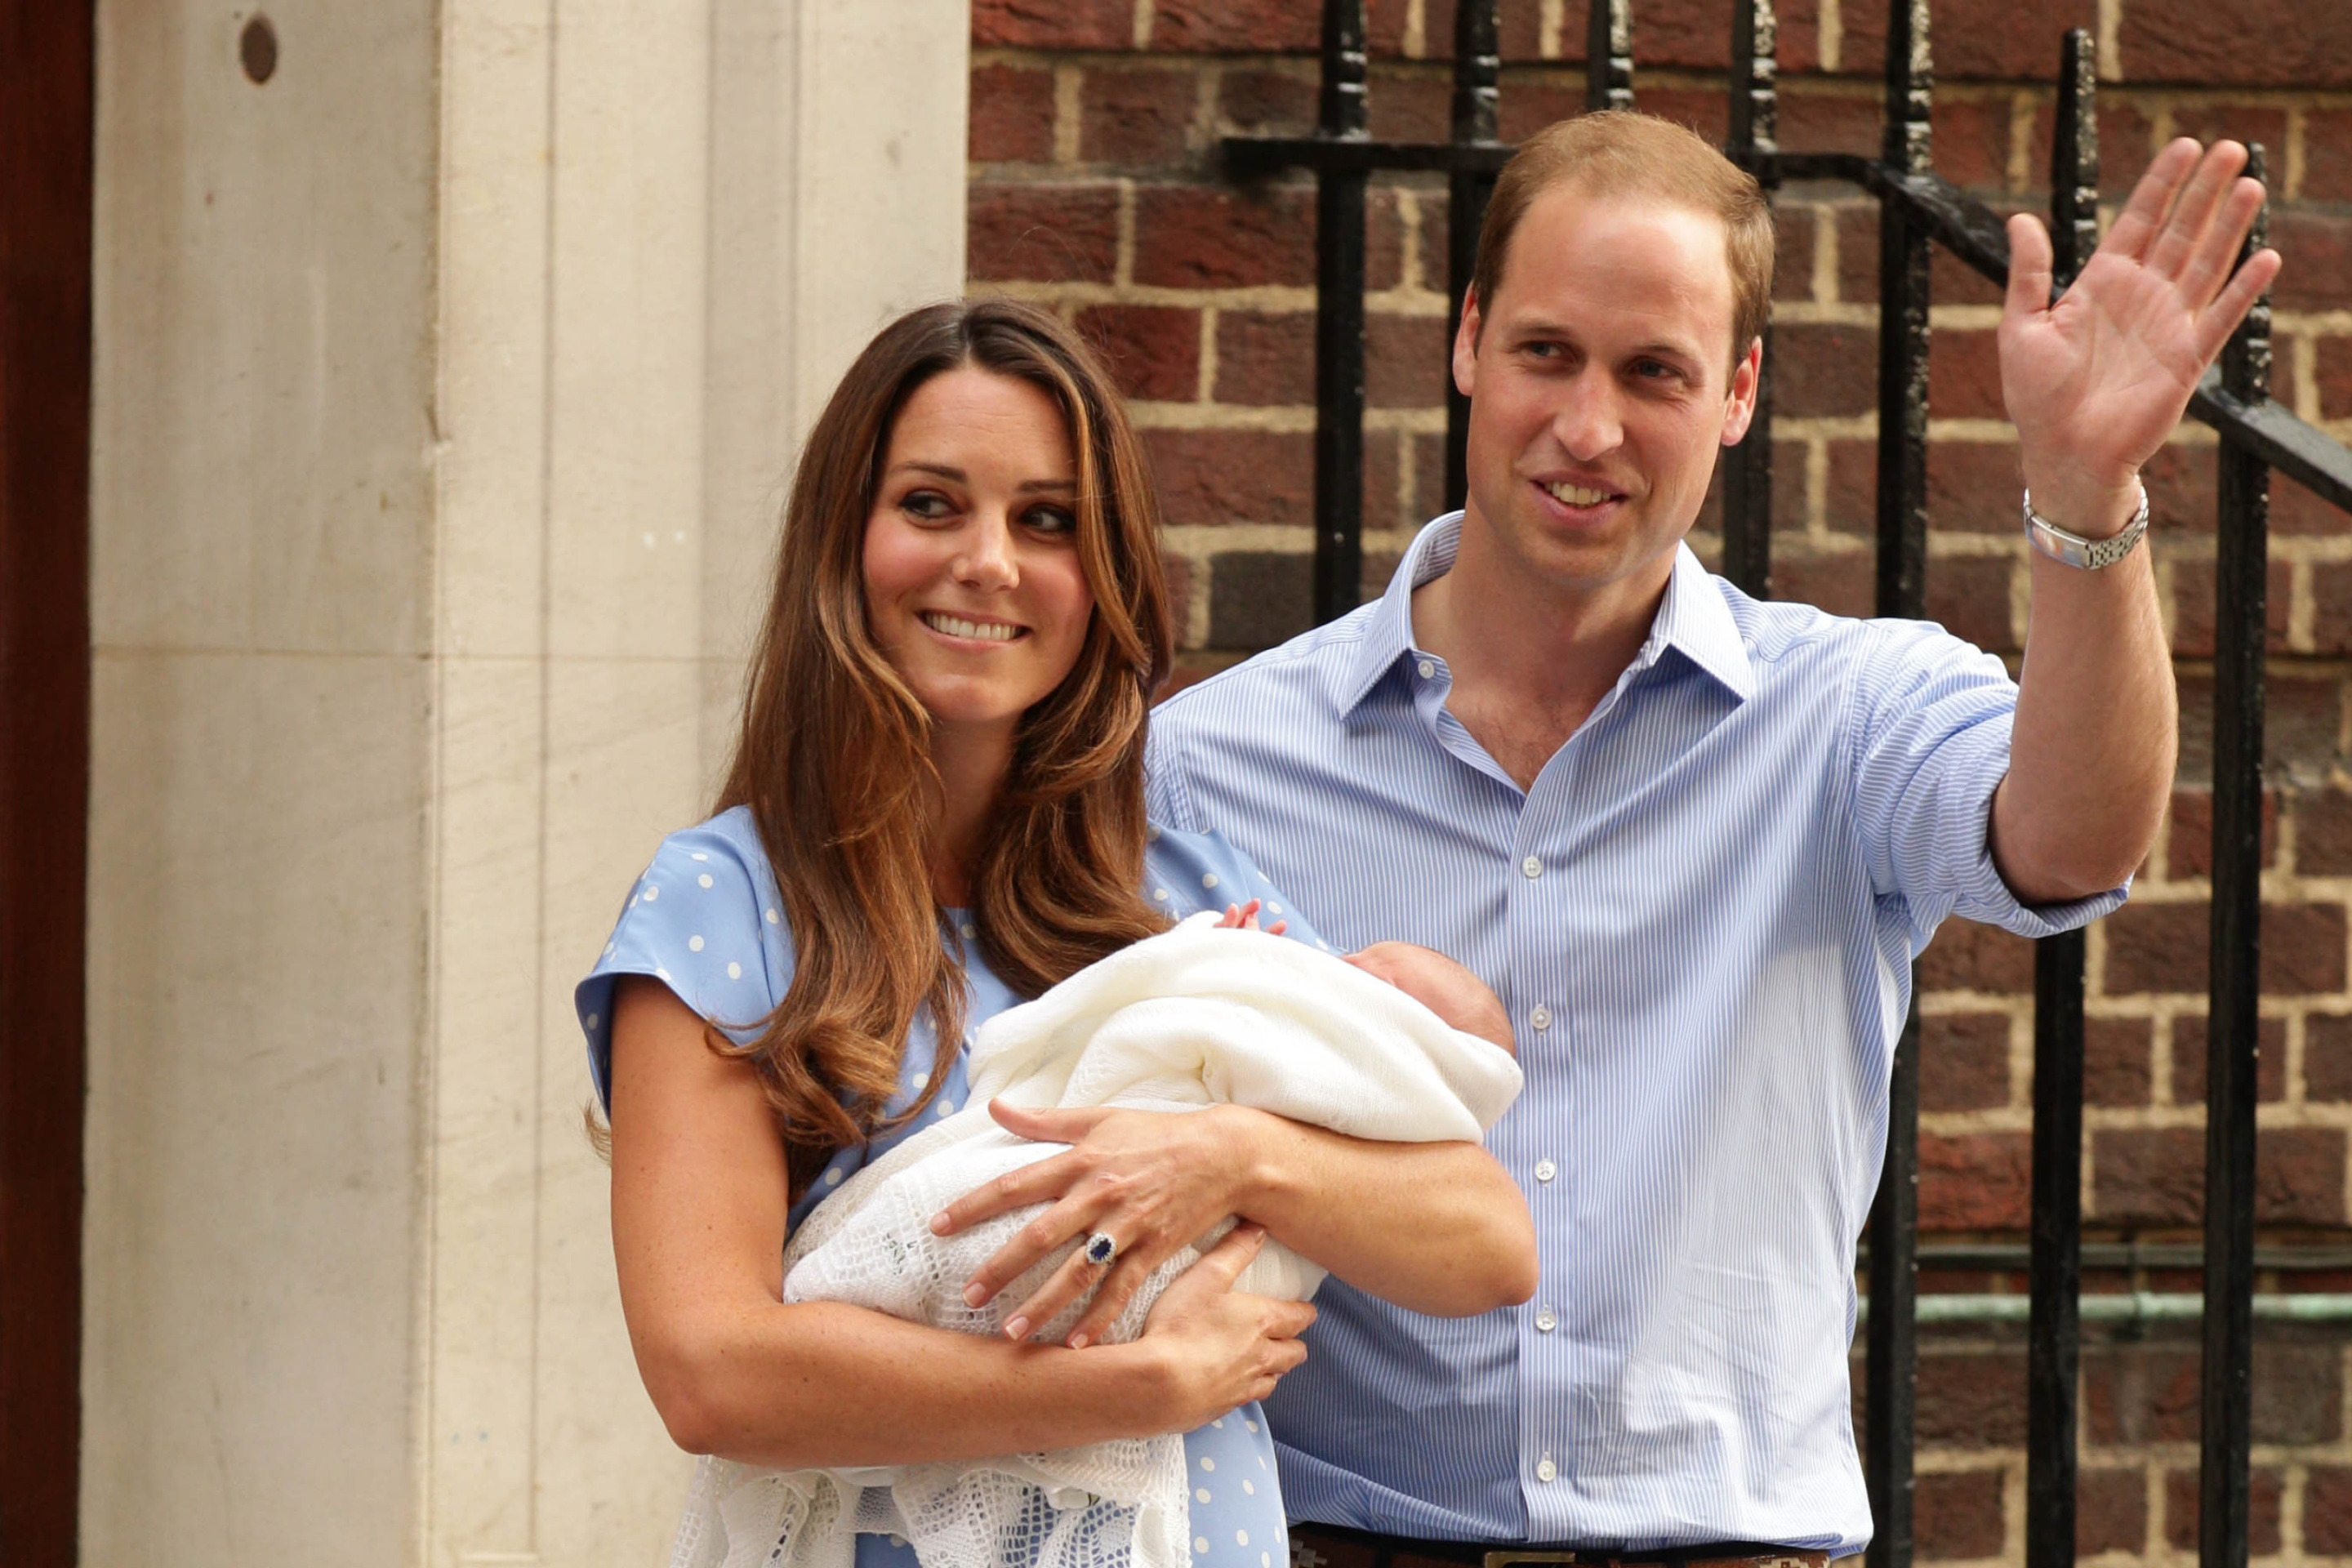 Royal Family Kate Middleton and William Prince wallpaper 2880x1920